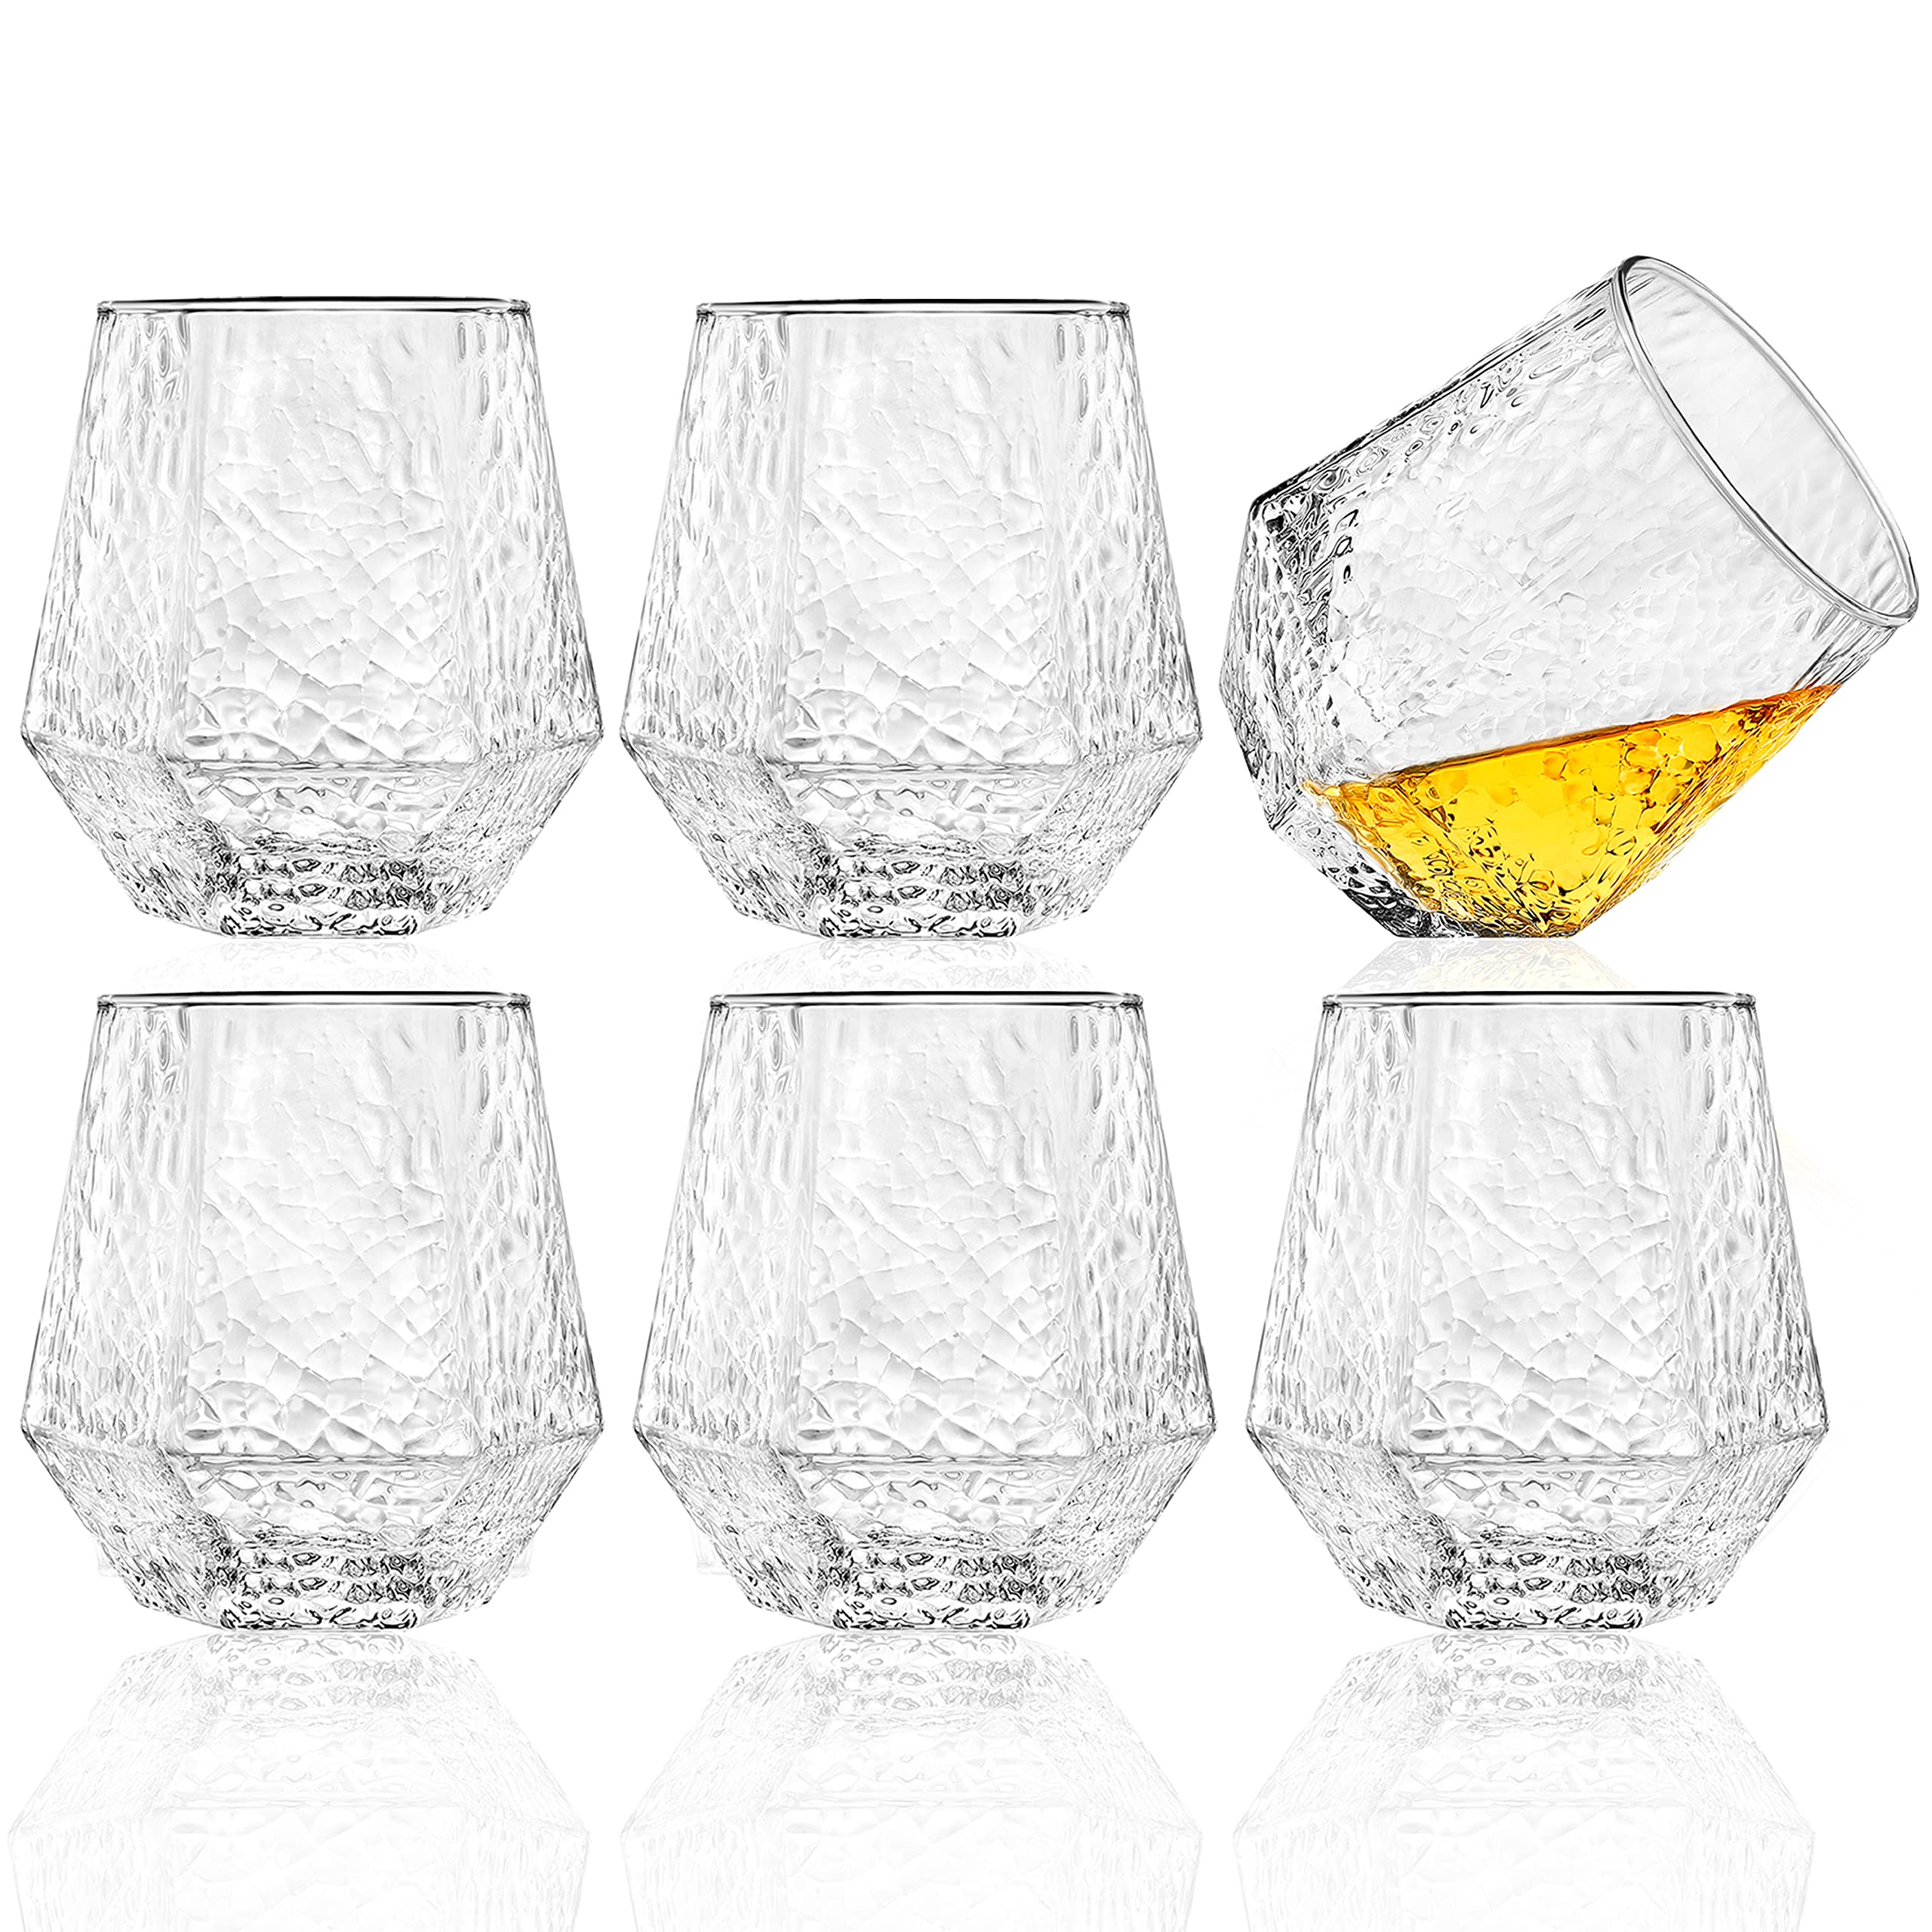 Diamond Glasses - Stemless Wine Glass Set of 6 - Geometric Tilting Design - Rolling Whiskey Glasses - Stem Less Anti Rocking Cup Diamonds Shaped - Tilted Glassware Drinking Tumblers for Wiskey/Wine